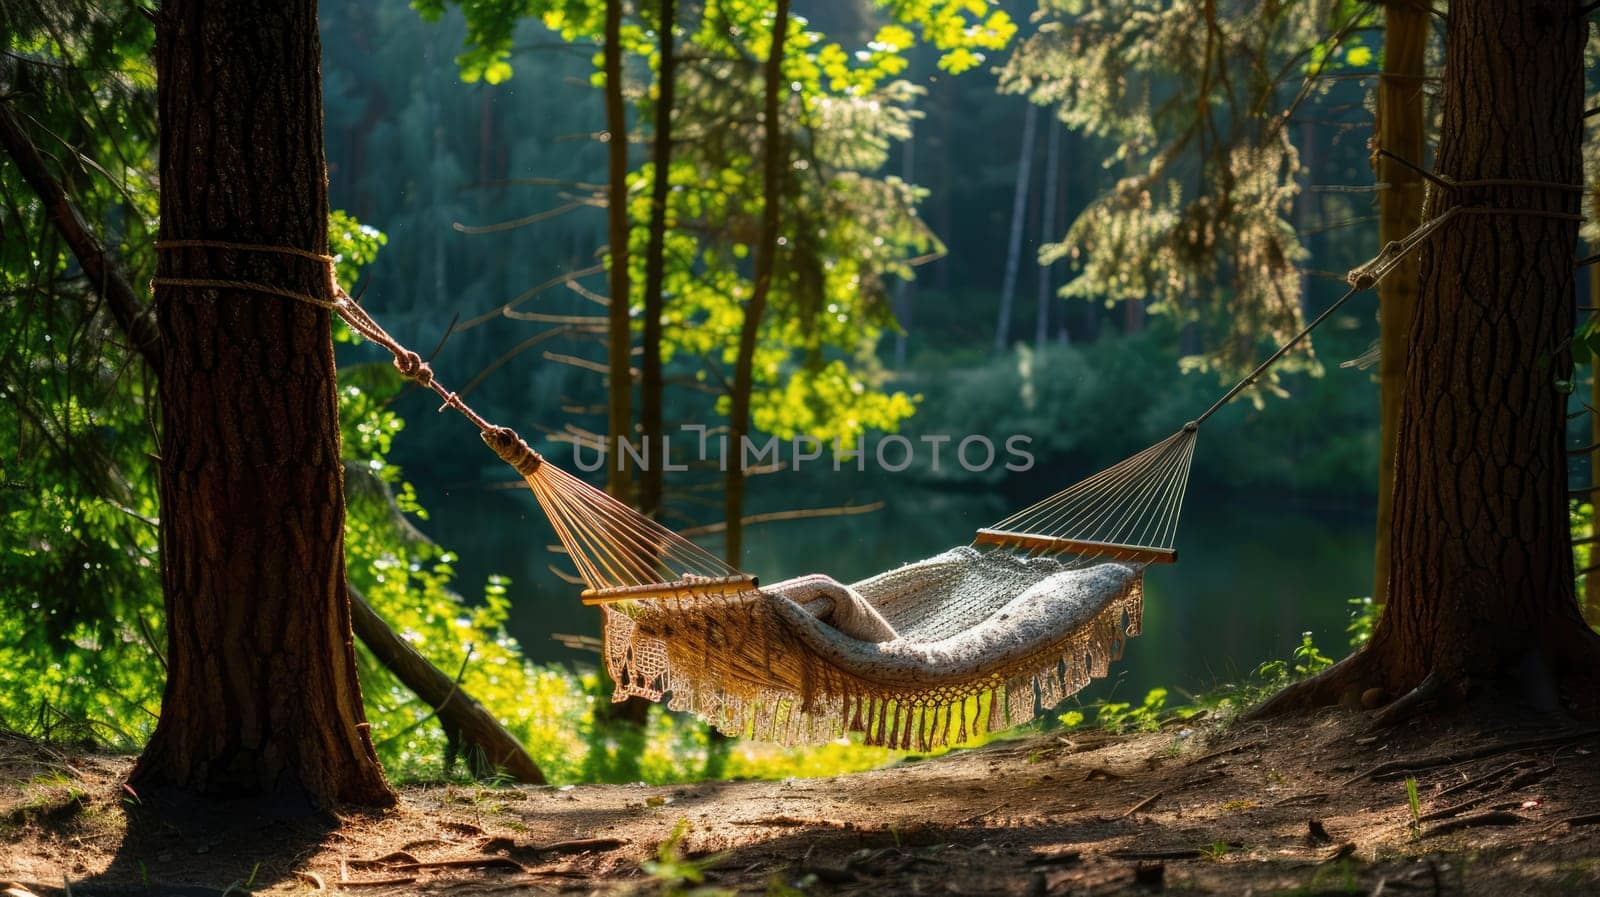 Hammock for a cozy rest in the shade of trees AI